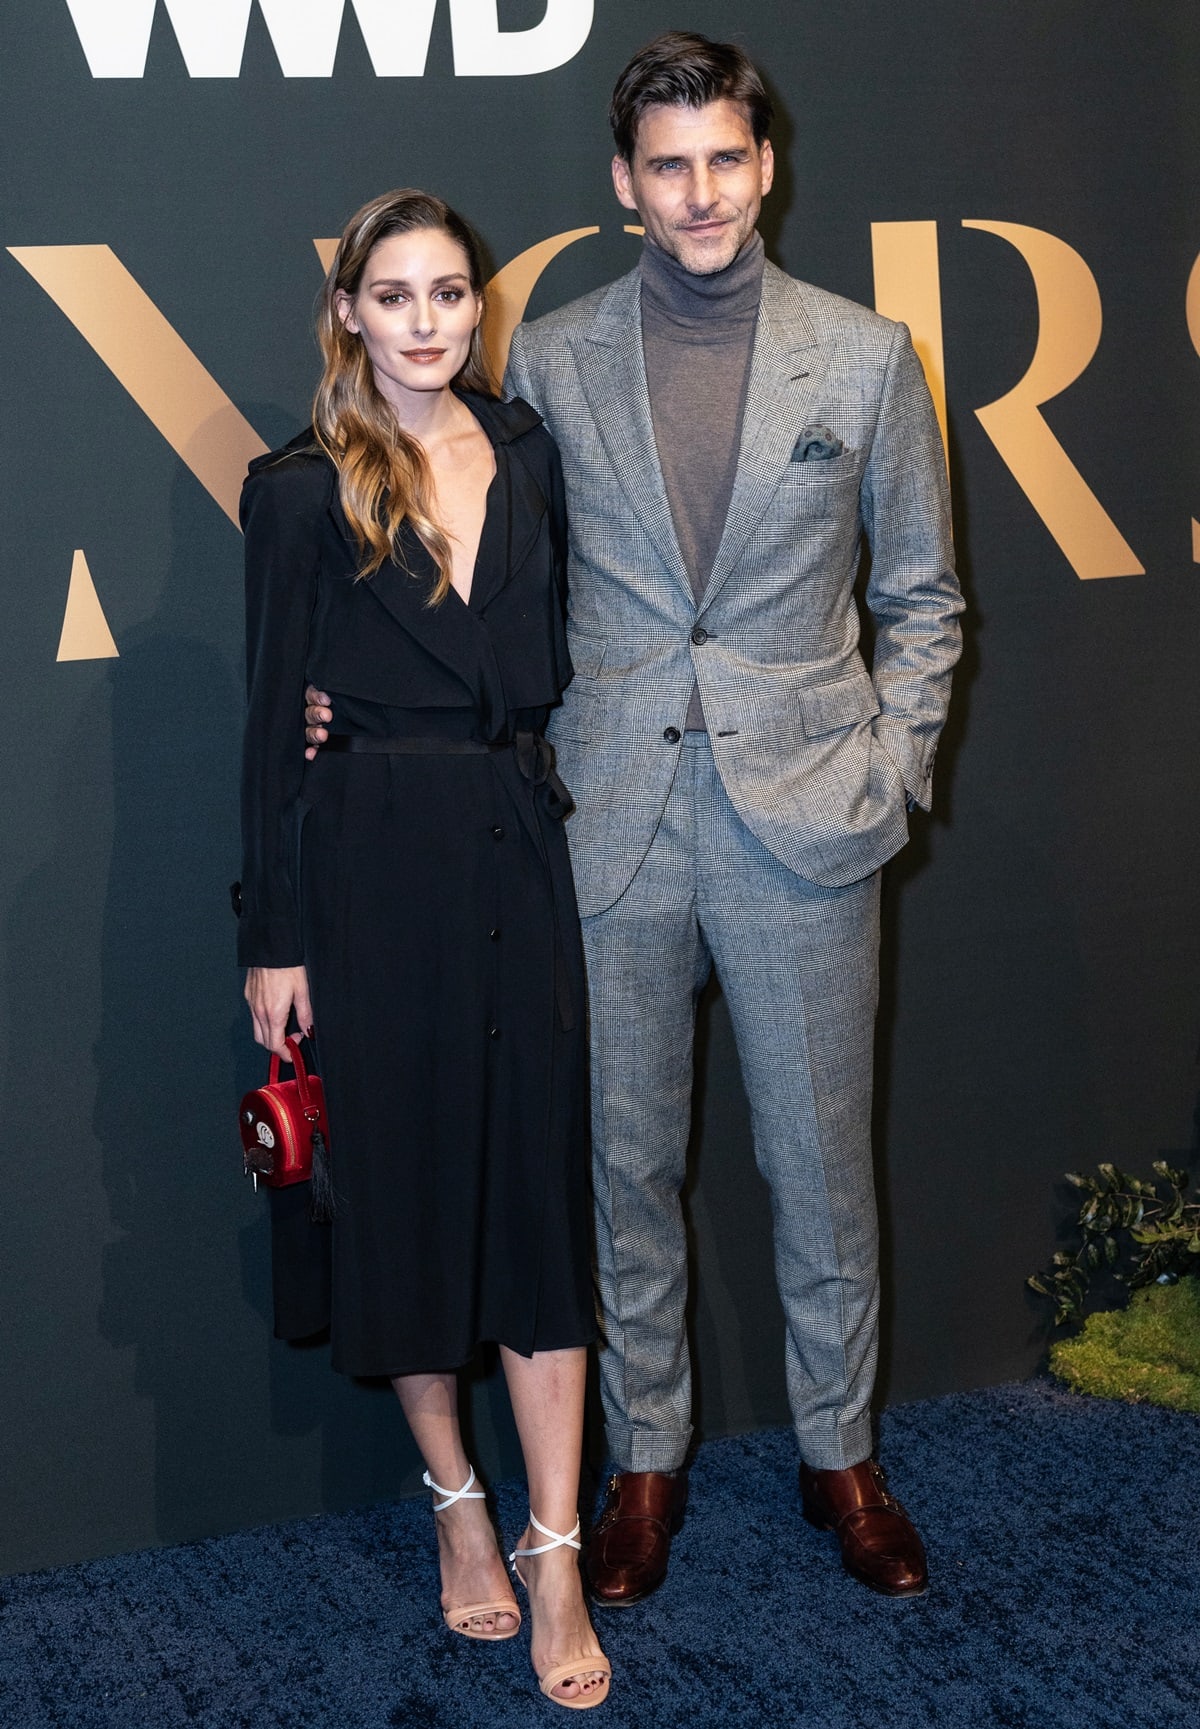 Johannes Huebl stands at 1.75 m (5 ft 9 in) in height, while Olivia Palermo's height is 5ft 5 (165.1 cm)